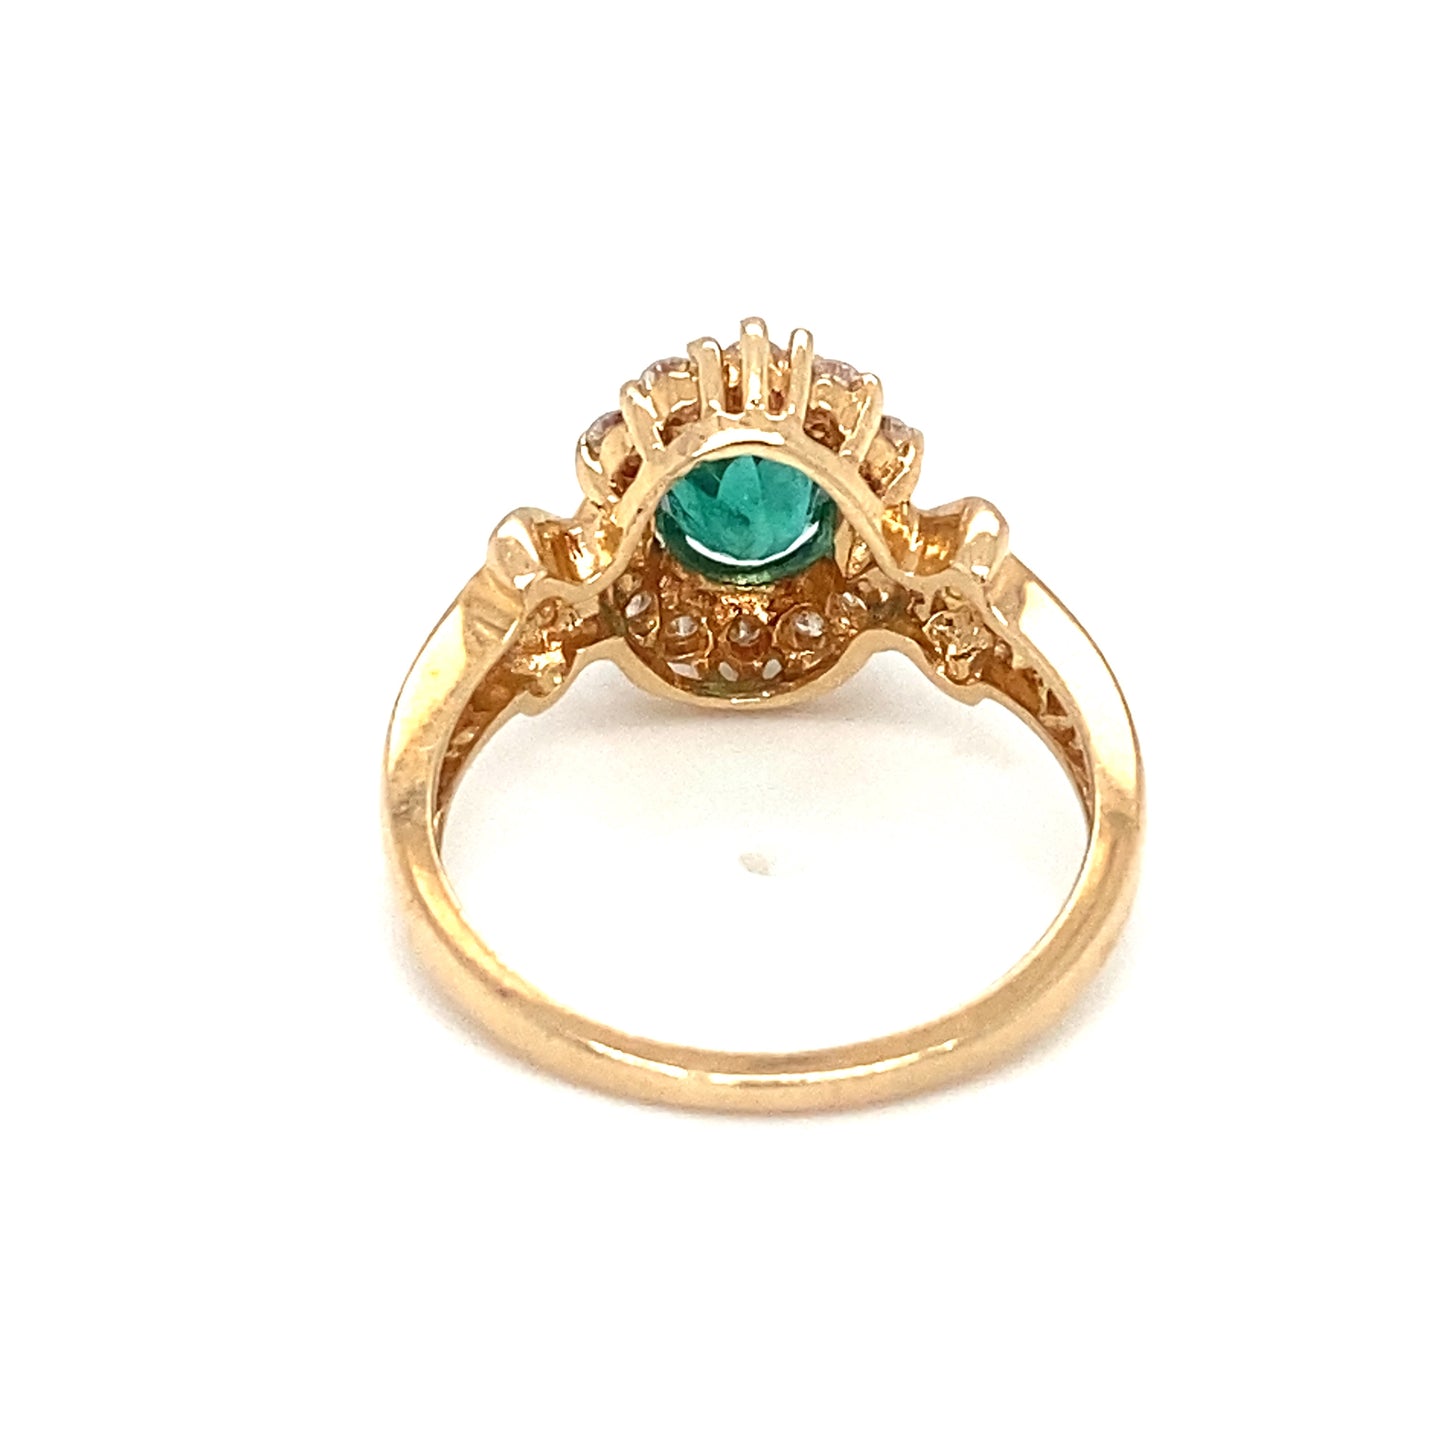 Circa 2000s 1.30ct Oval Emerald and Diamond Ring in 14K Gold